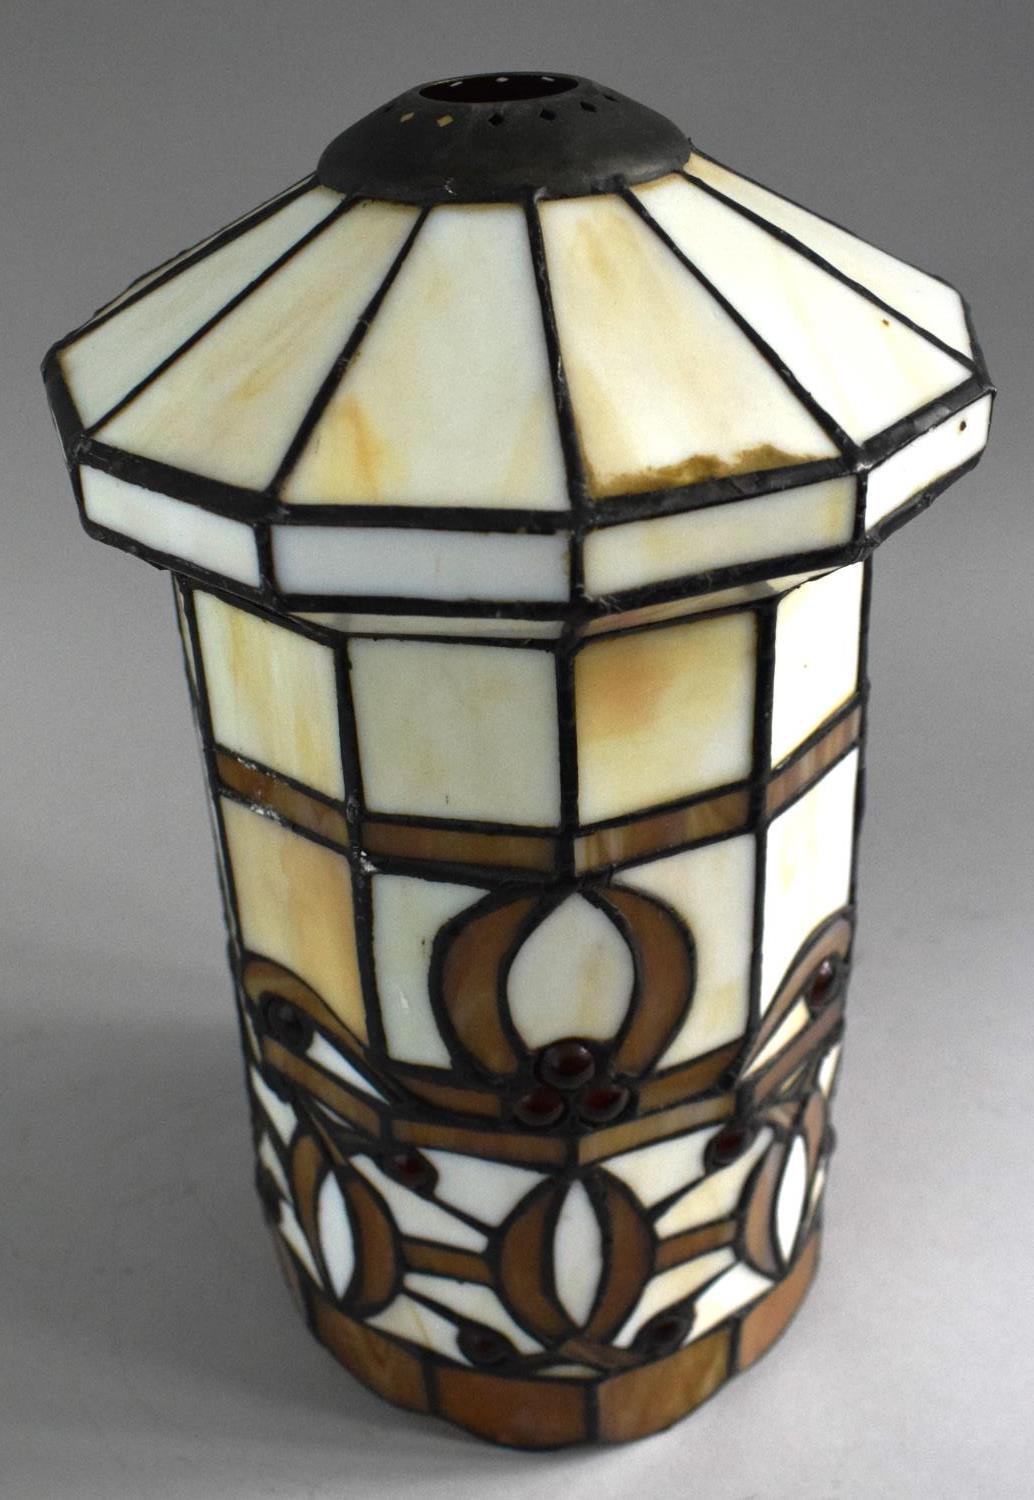 A Reproduction Cylindrical Tiffany Style Lamp Shade, 30cm High - Image 2 of 3